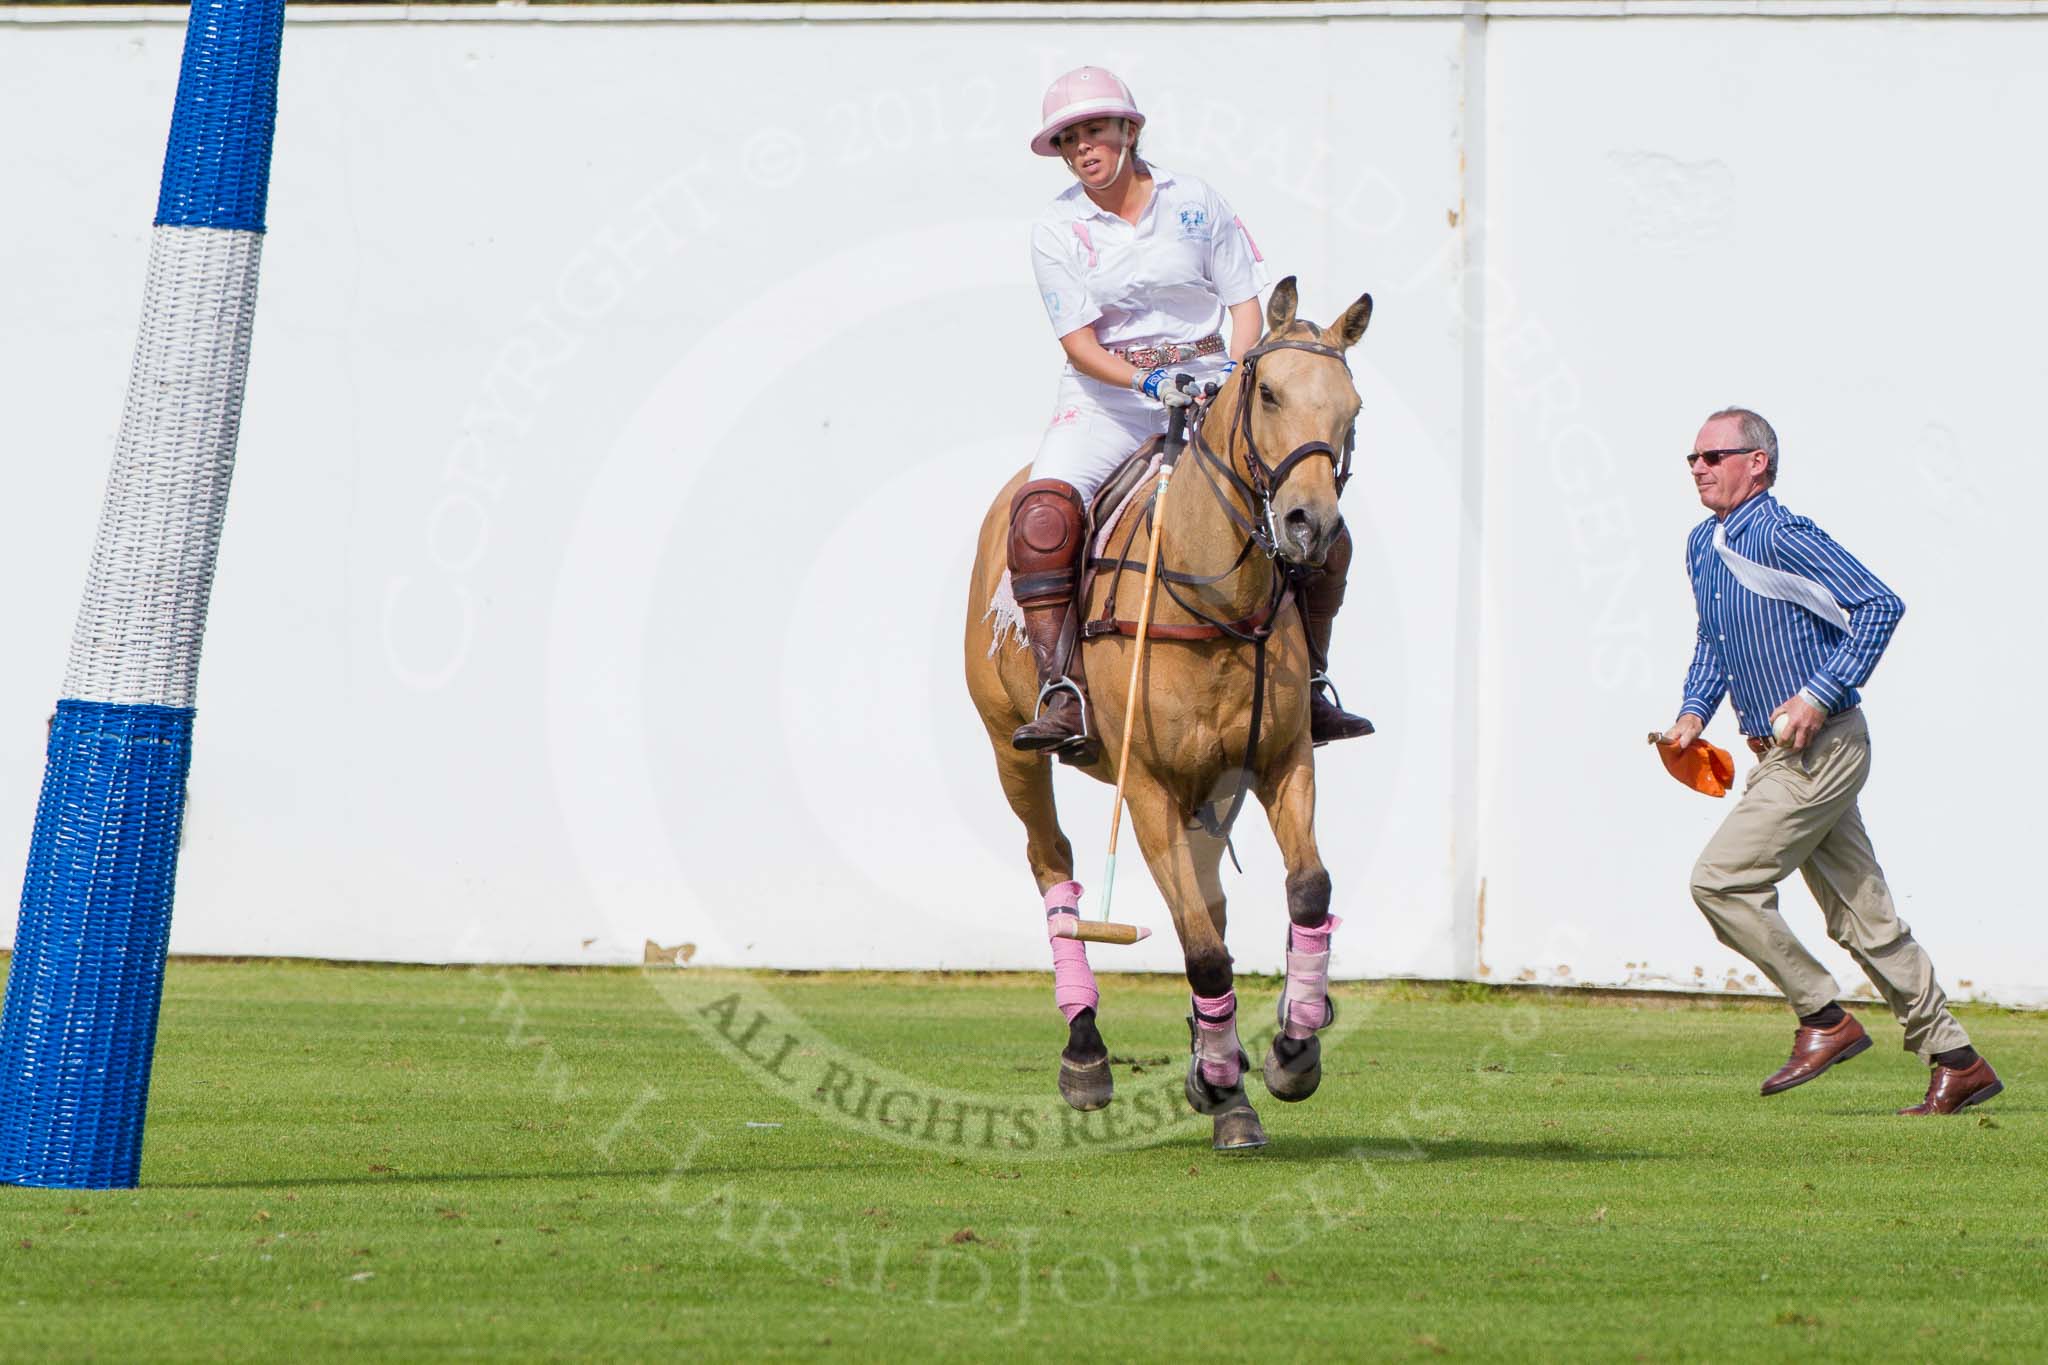 DBPC Polo in the Park 2012: Dawson Group Polo Team #1 Freya Dawson, having achieved another goal. Acting as goal judge is Colin Palmer..
Dallas Burston Polo Club,
Stoneythorpe Estate,
Southam,
Warwickshire,
United Kingdom,
on 16 September 2012 at 13:10, image #141